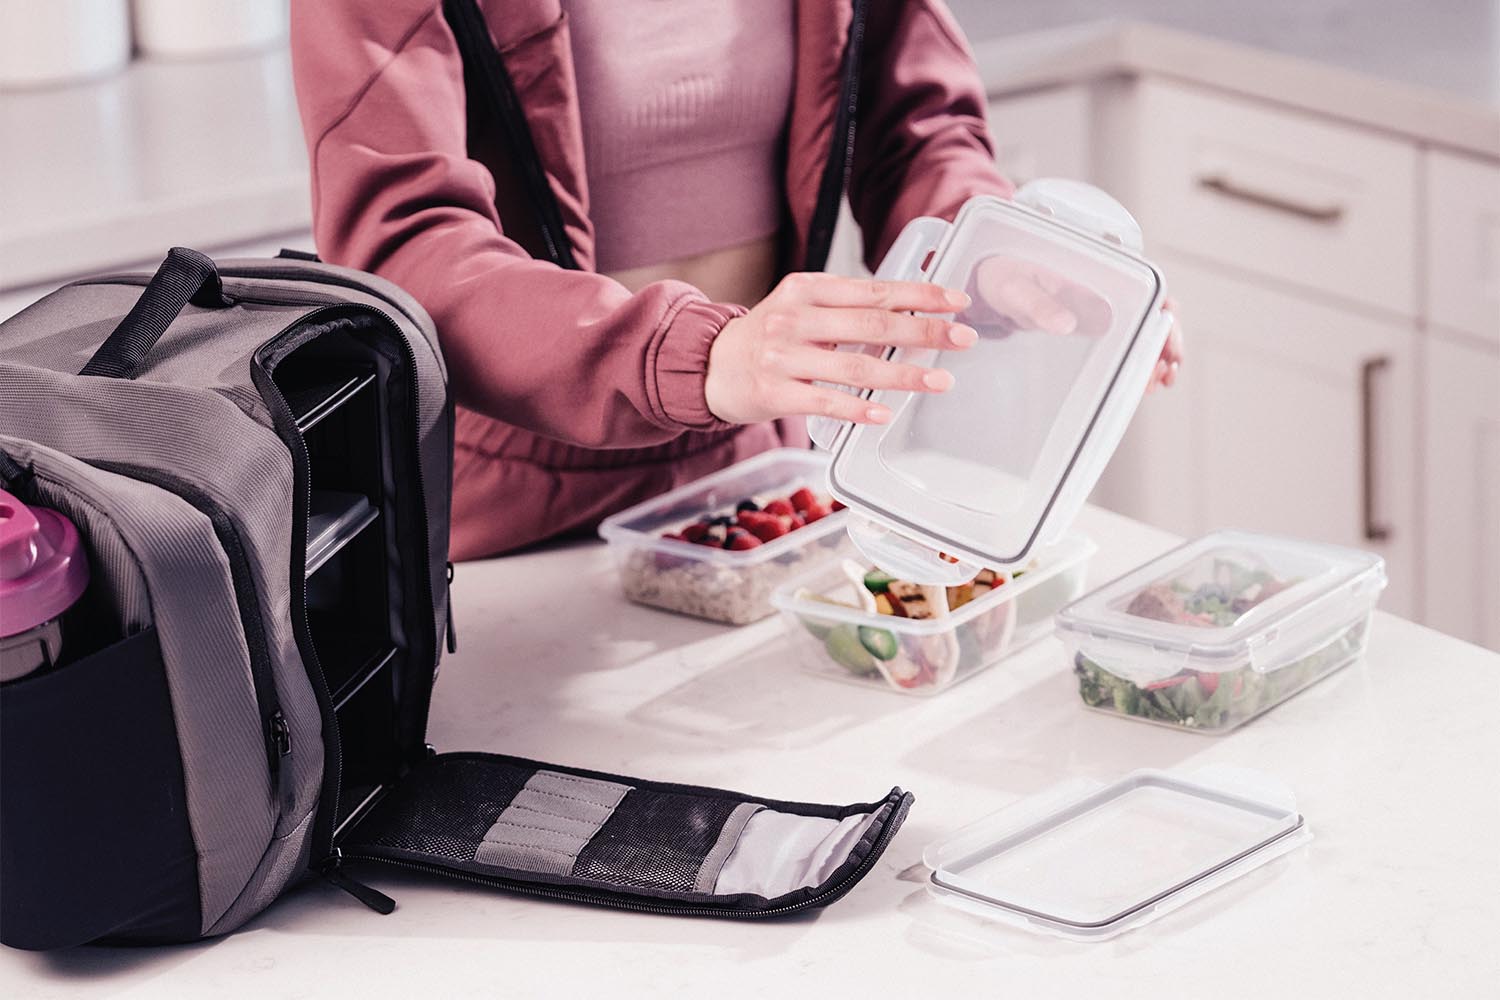 Woman packing a meal prep bag. Three meal containers are on the table ready to pack into the bag.